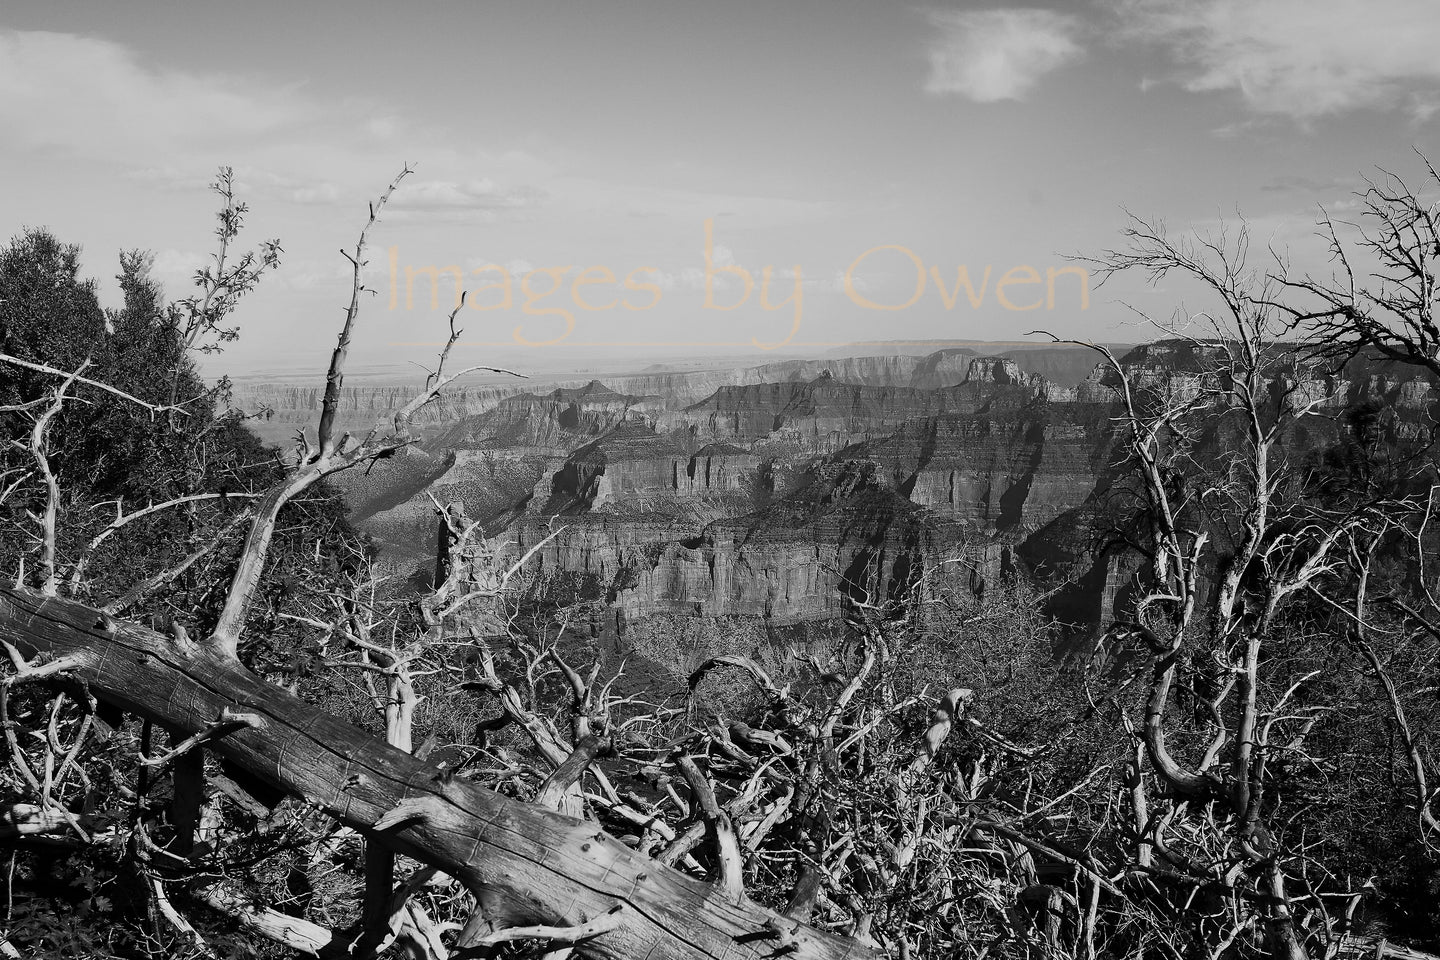 Textures of the North Rim.